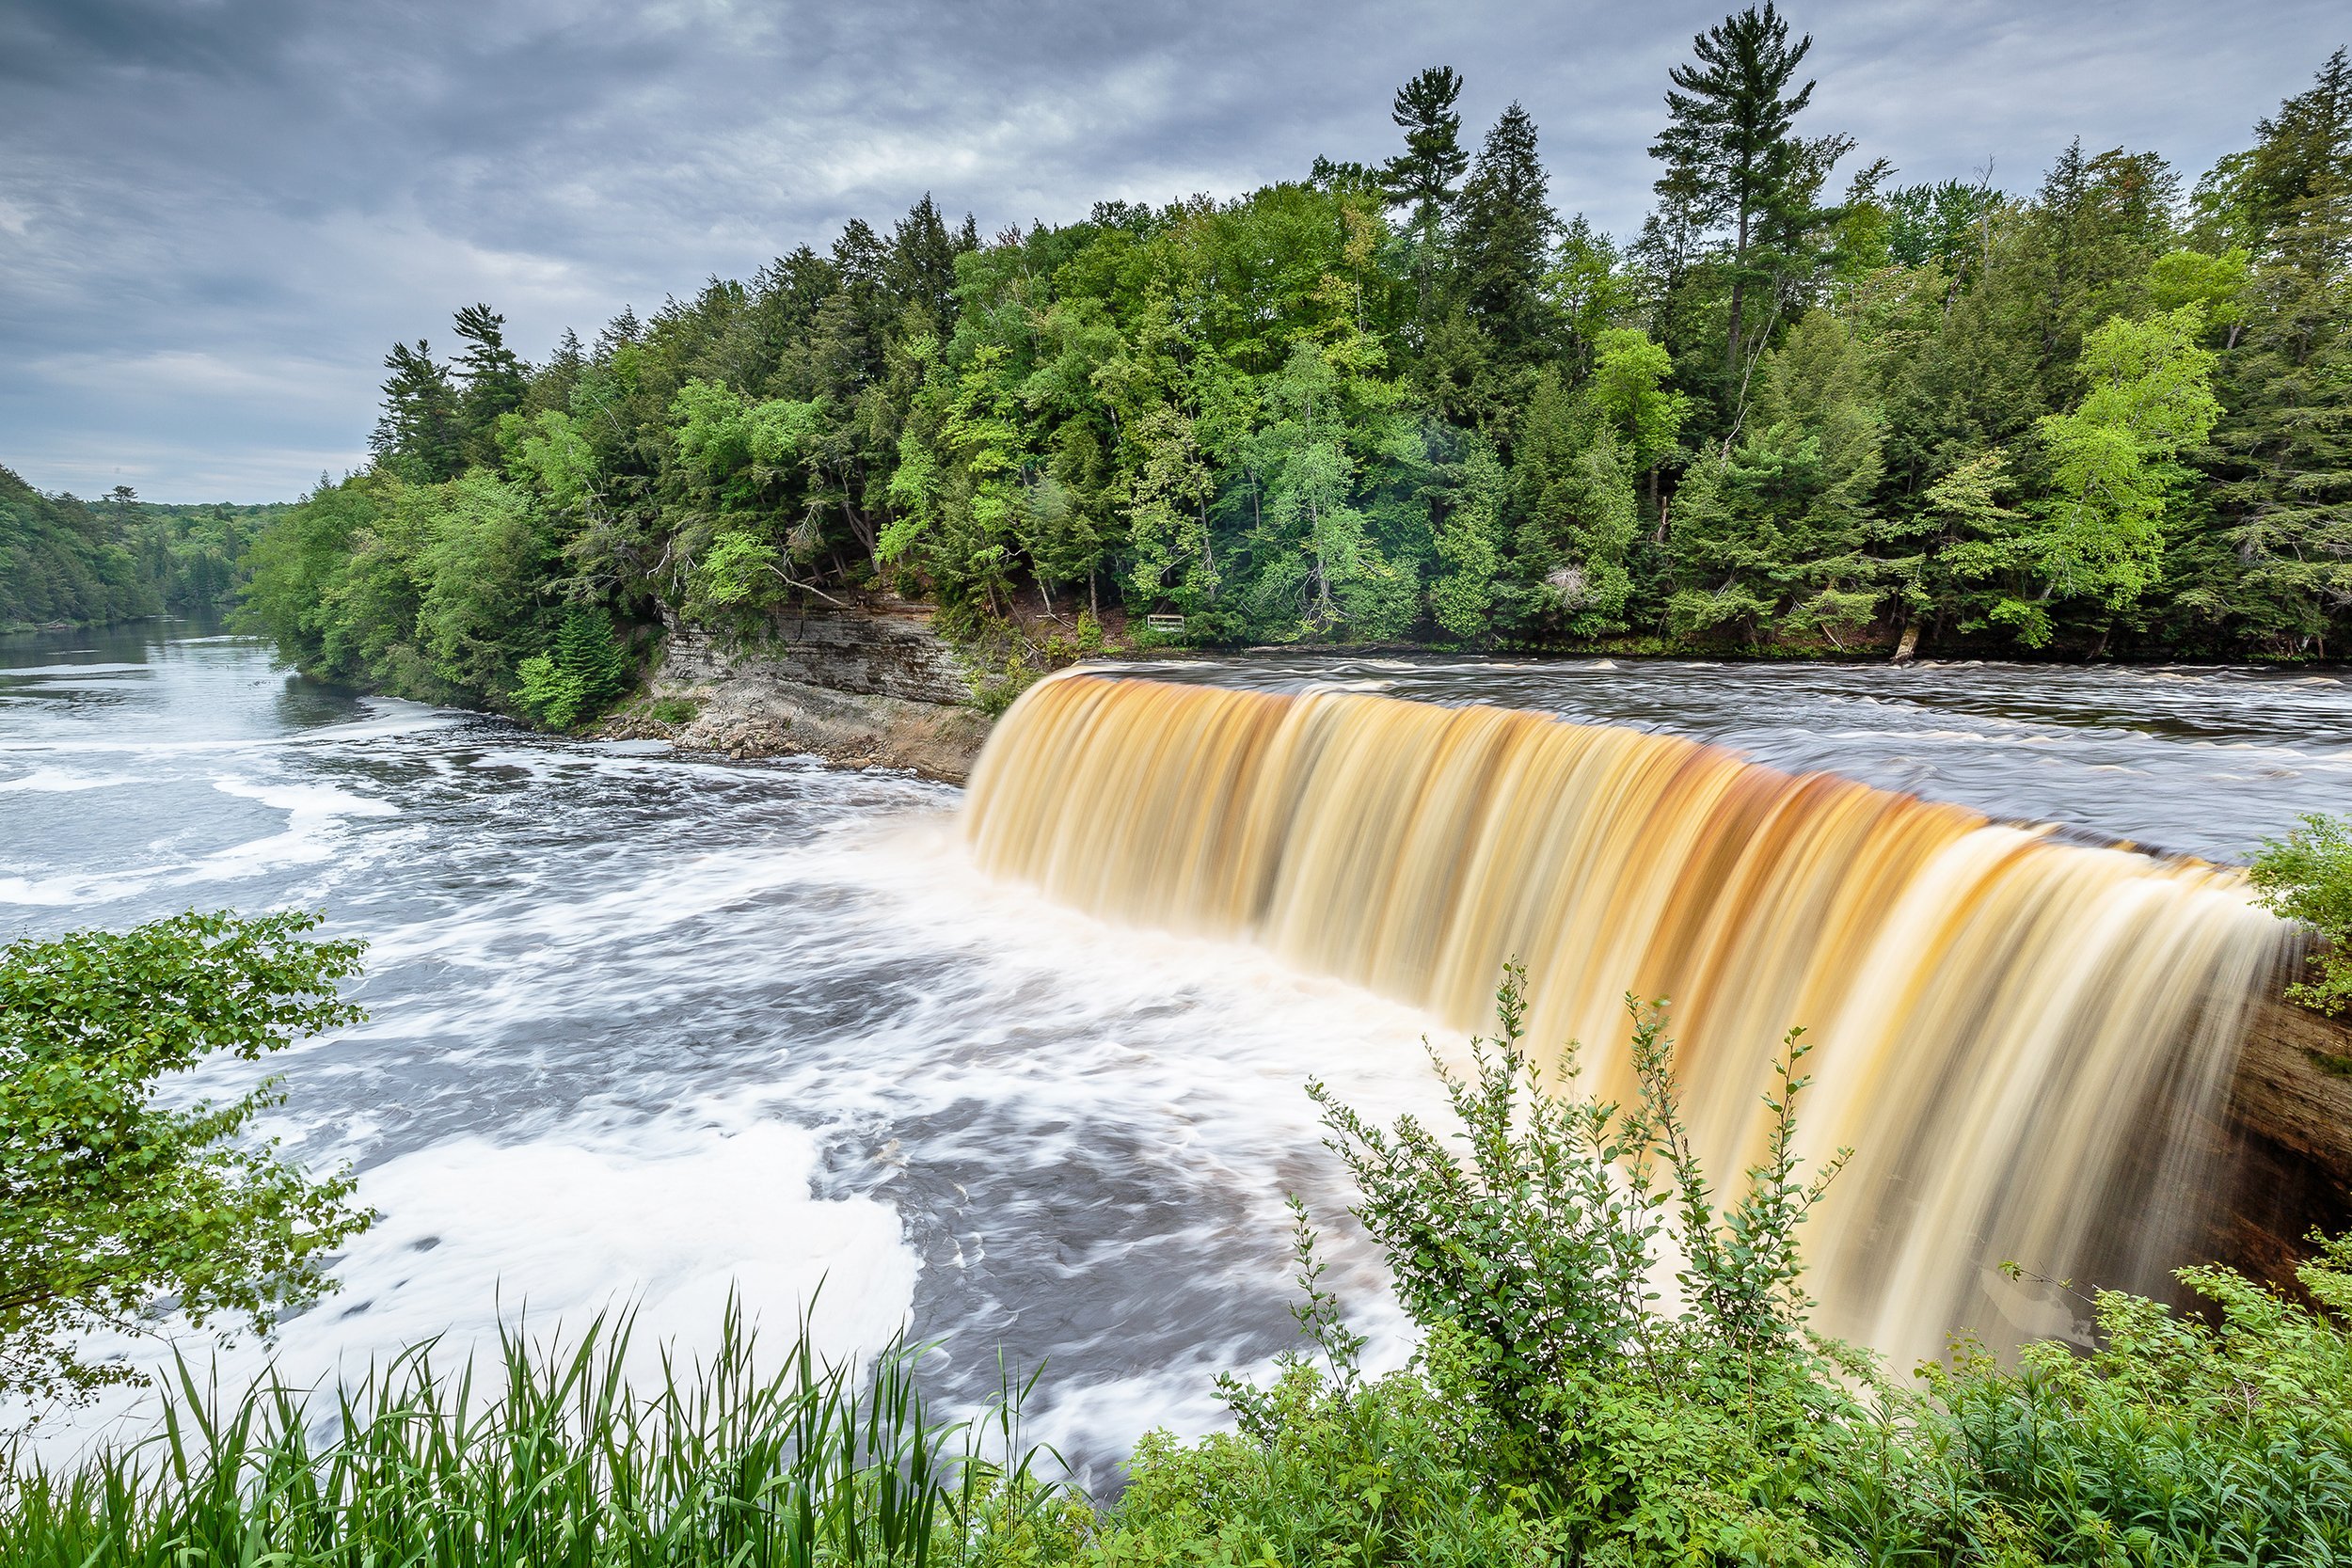 <p><a href="https://www2.dnr.state.mi.us/ParksandTrails/Details.aspx?id=428&type=SPRK">Tahquamenon Falls State Park</a> is home to one of the largest waterfalls east of the Mississippi. The Upper Falls feature a drop of nearly 50 feet, and that's just one reason to make a weekend visit this fall. The tannins from the cedar, spruce and hemlock in the river makes the water a striking copper color that pairs beautifully with the autumn colors of northern Michigan. Campers have a choice of several campgrounds within the park for RV visits.</p> <p><b>Related:</b> <a href="https://blog.cheapism.com/best-waterfalls-in-u-s-3781/">Beyond Niagara: Where to Find Waterfalls in All 50 States</a> </p>